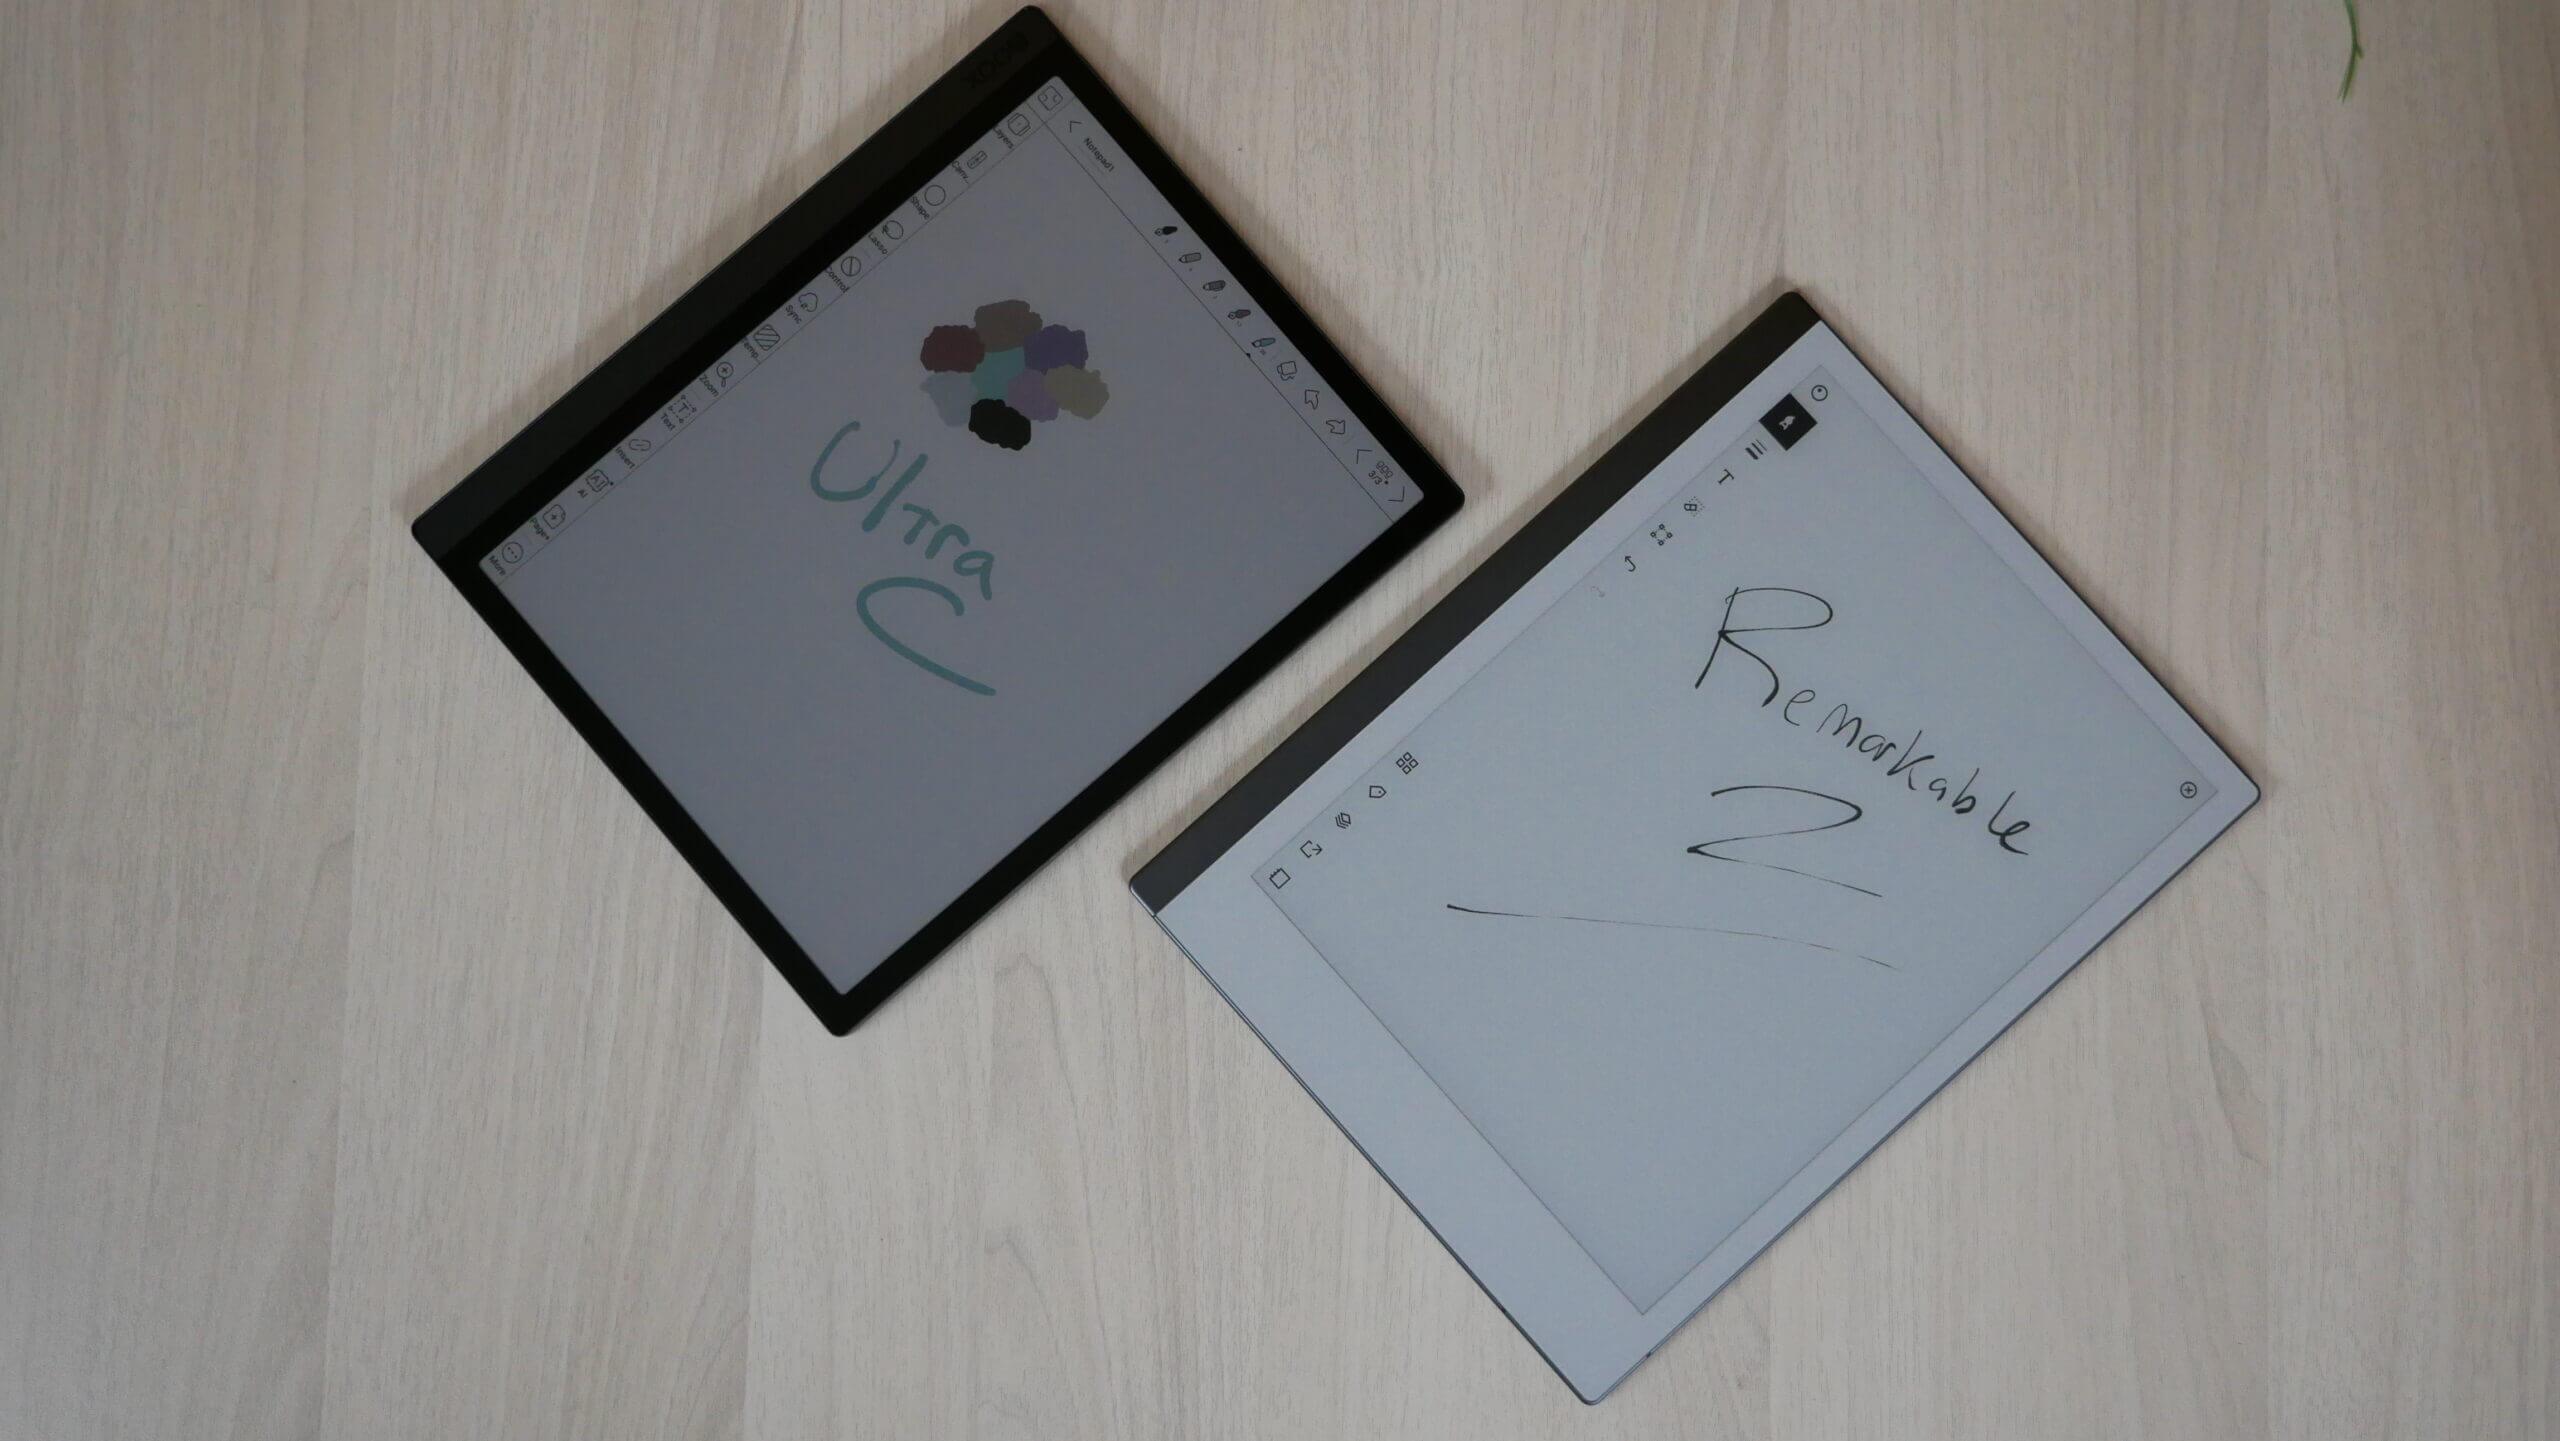 ReMarkable's paper tablet returns for round two – Pickr